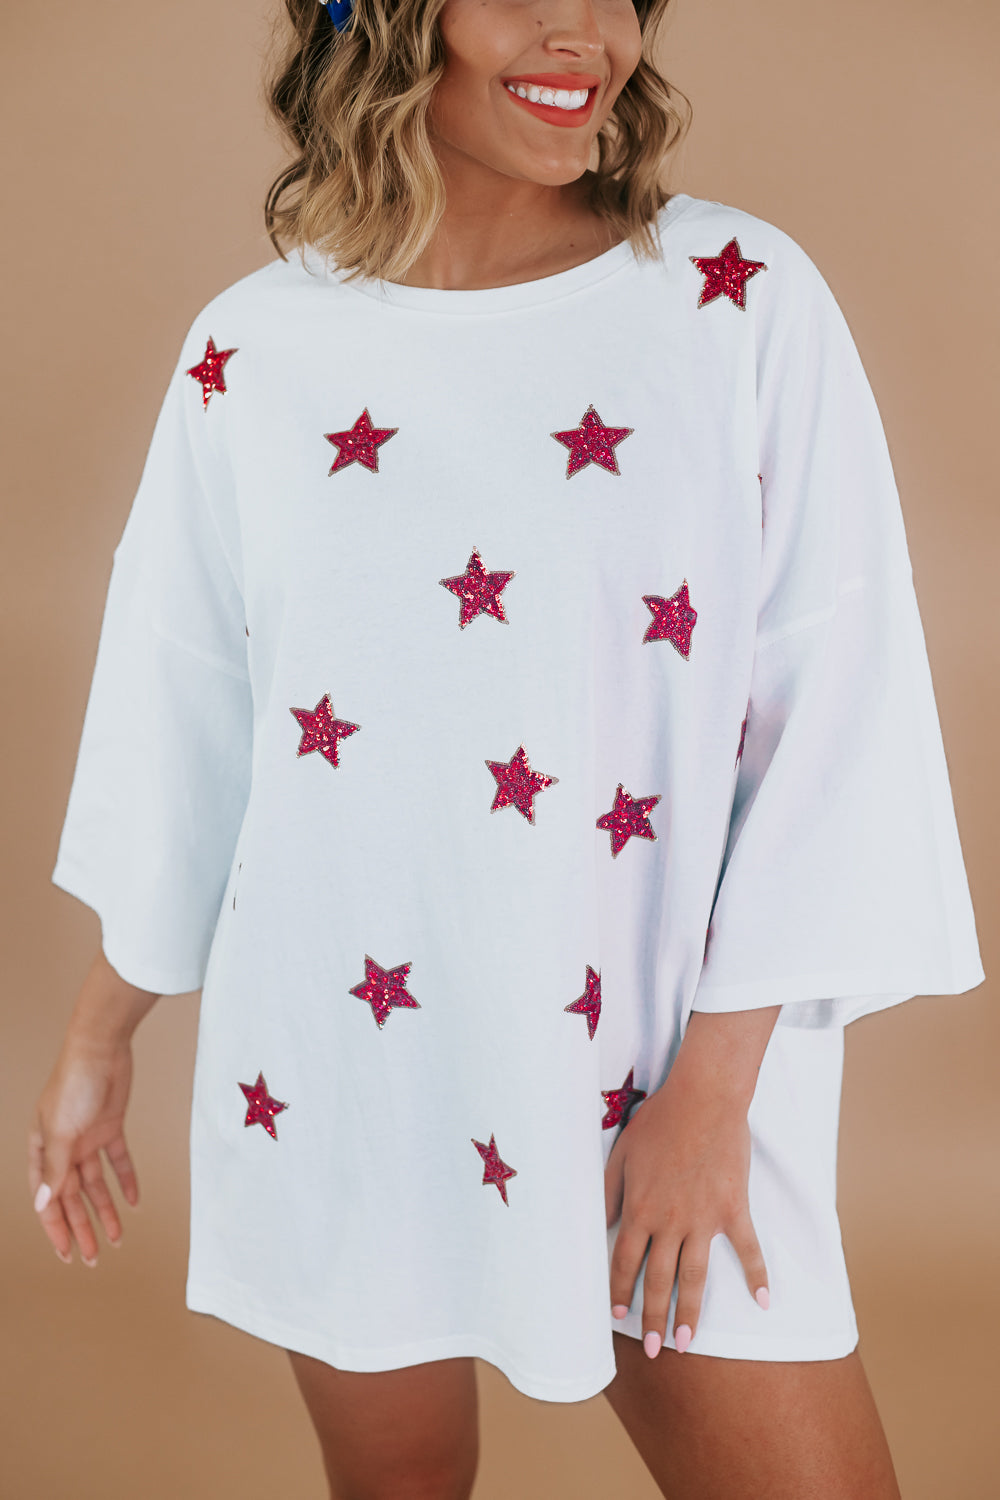 Say It's So Sequin Star Top, White